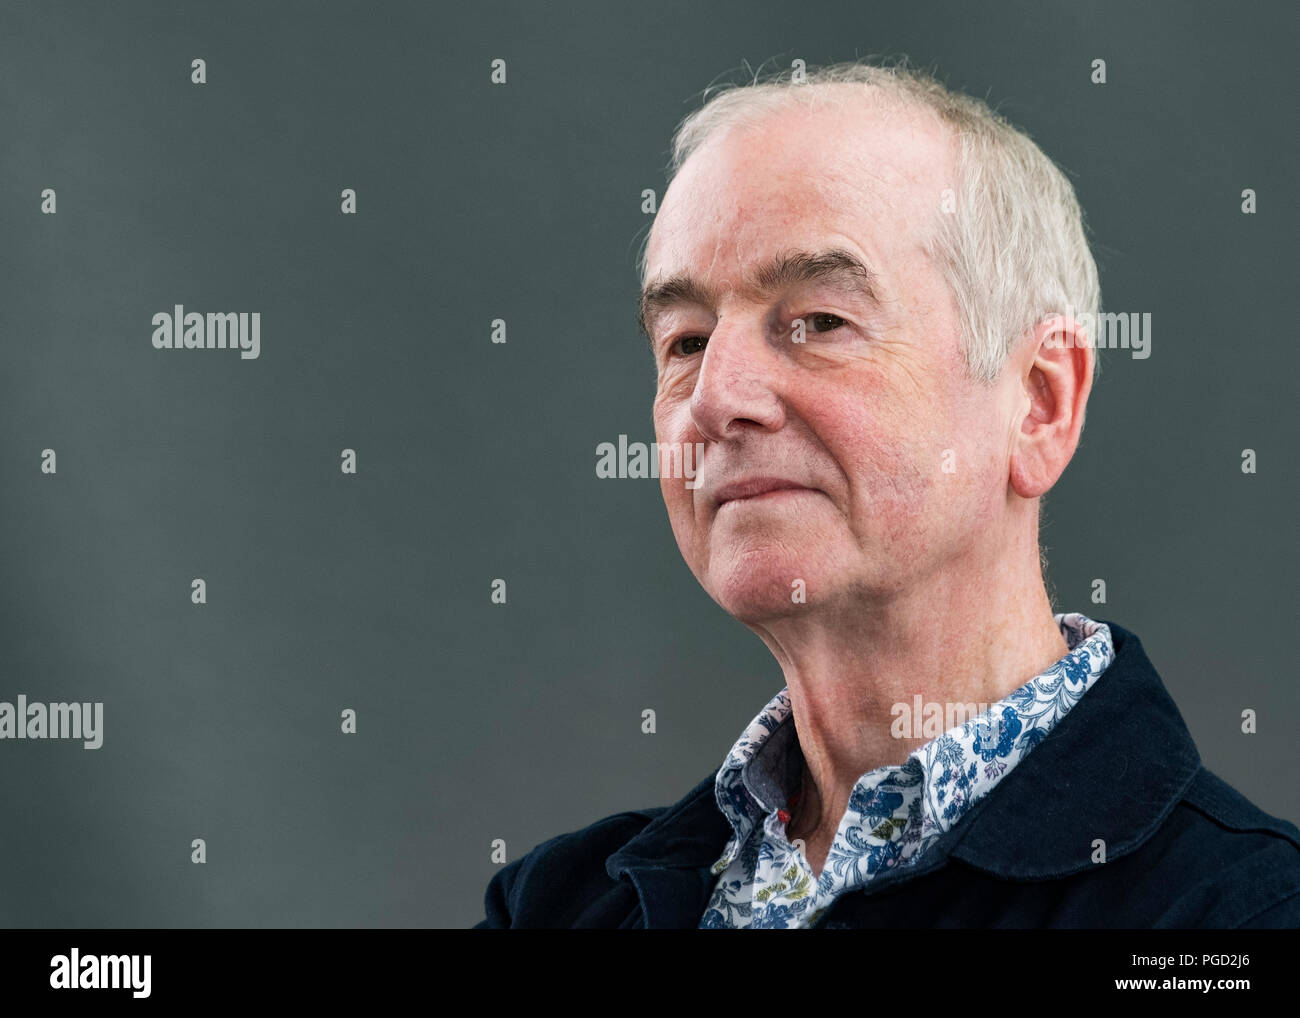 Edinburgh, Scotland, UK. 25 August, 2018. Pictured; David Almond the children's author and author of Skellig, Clay and Kit's Wilderness. Credit: Iain Masterton/Alamy Live News Stock Photo